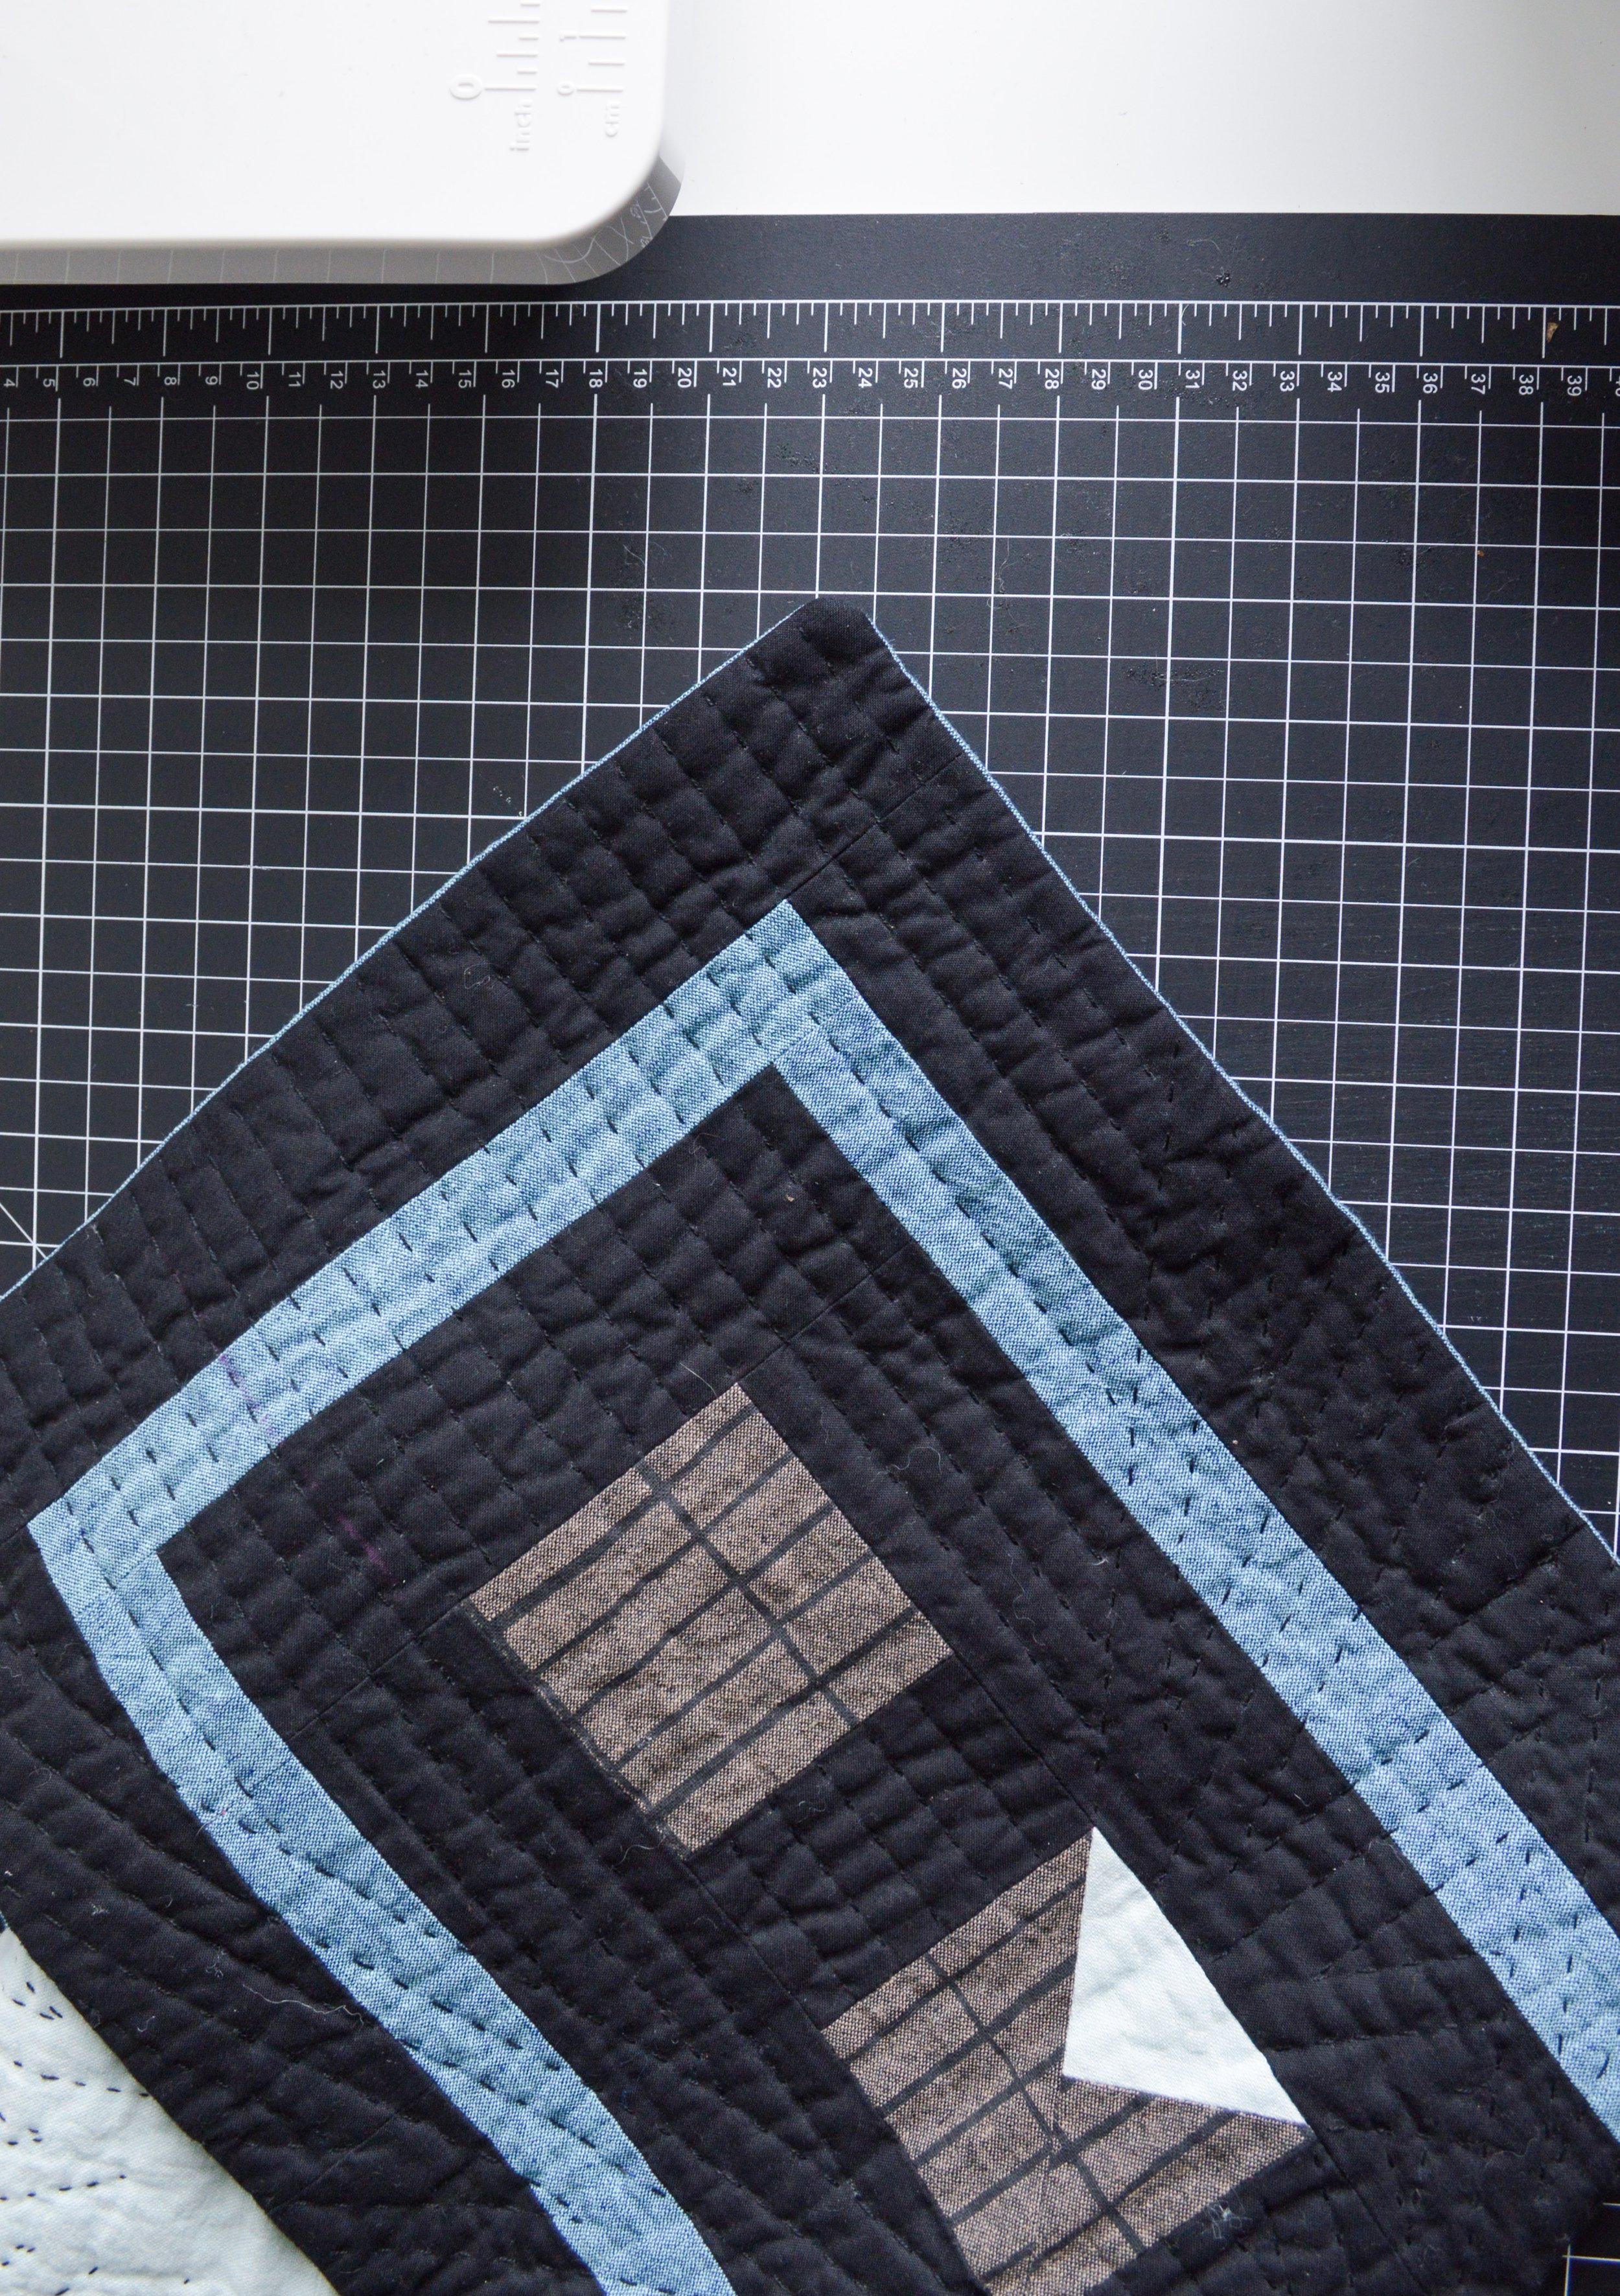  hand quilted mini quilt on a black cutting mat 